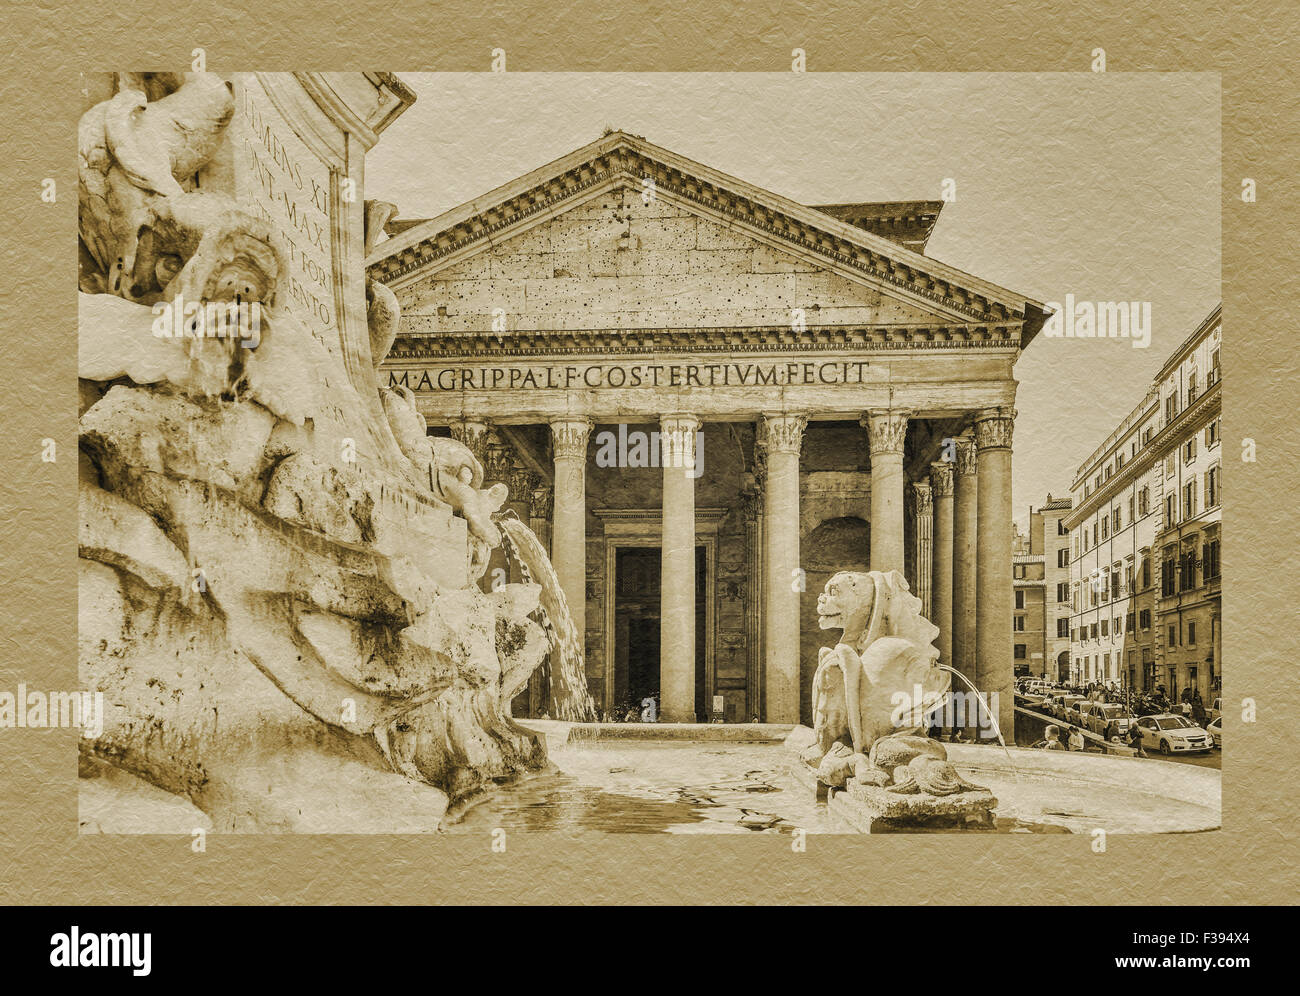 The Pantheon is since 609 ad, an Catholic Church. The fountain was created by Giacomo della Porta in 1575, Rome, Italy, Europe Stock Photo